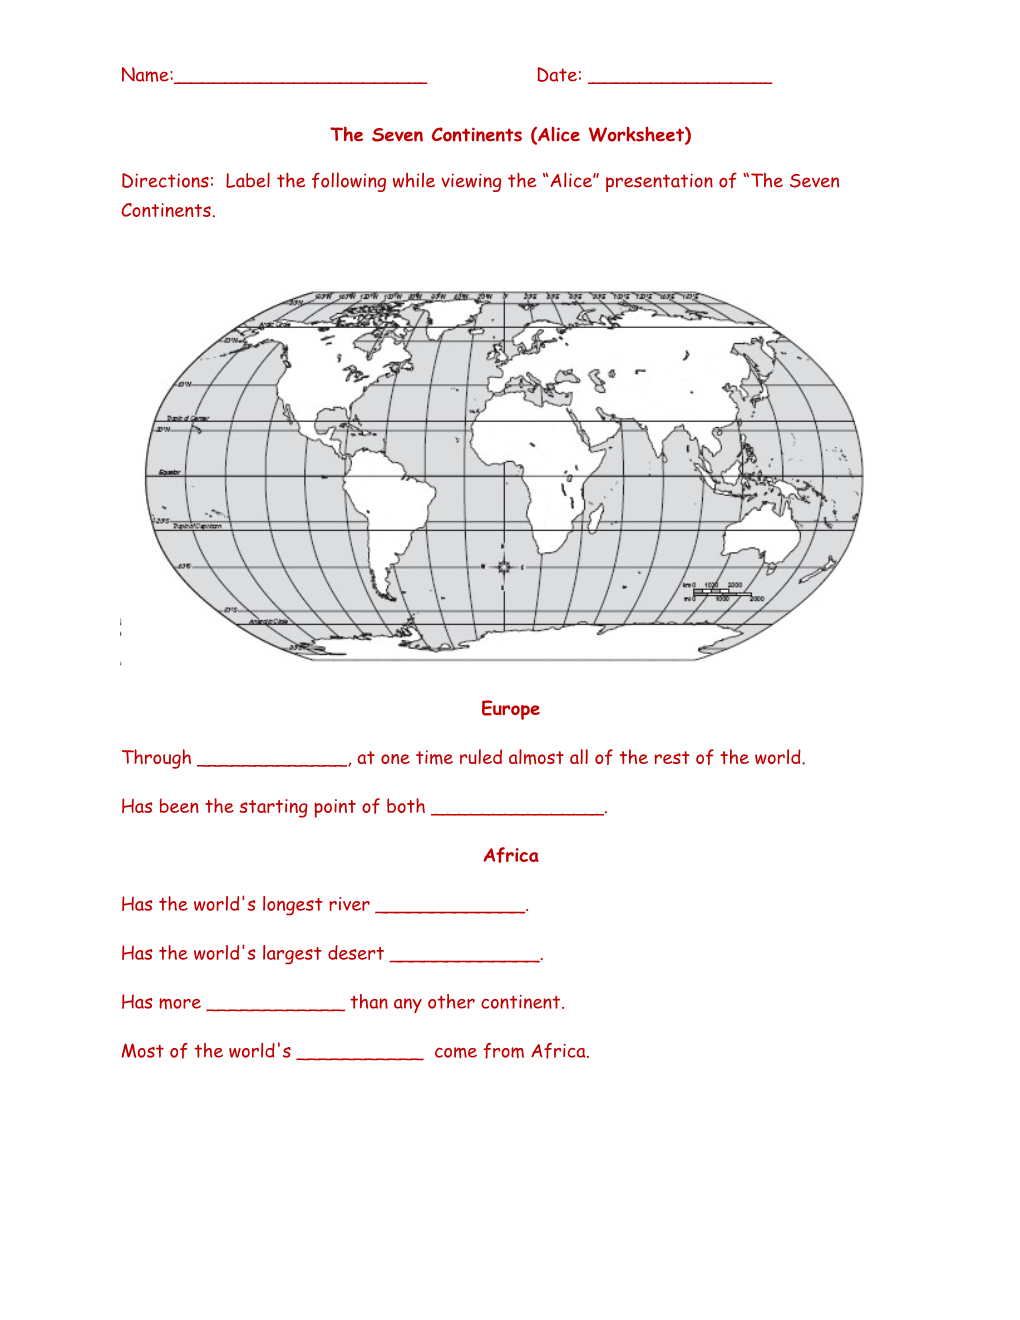 The Seven Continents (Alice Worksheet)